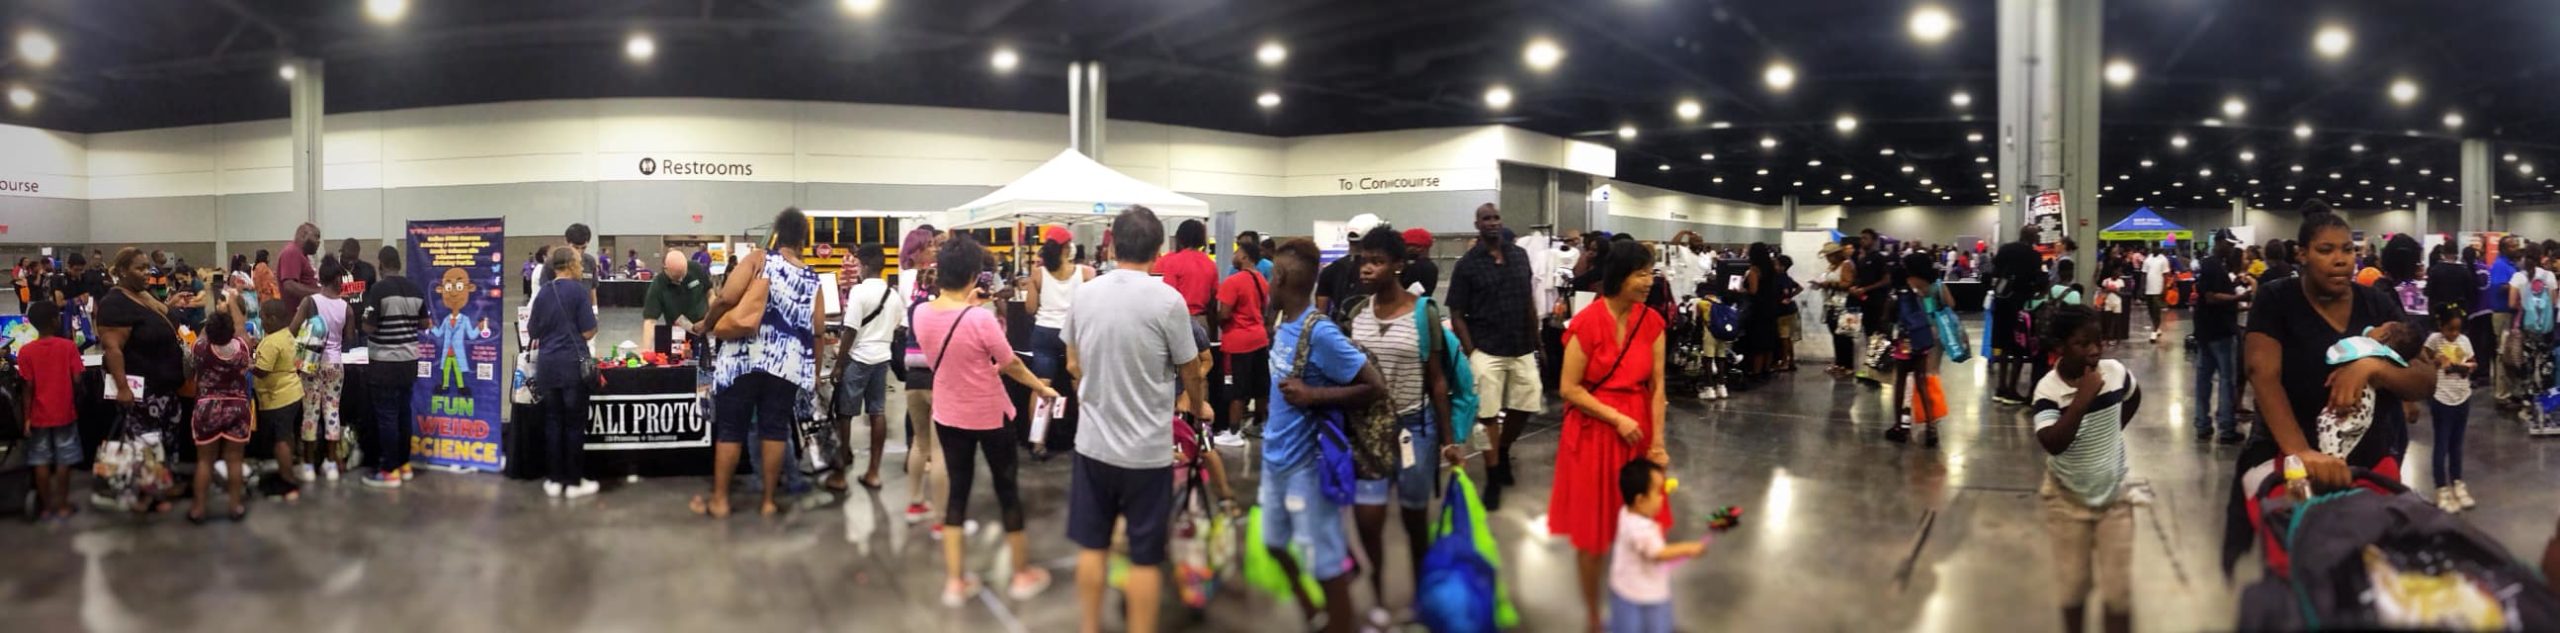 A crowd of parents, students and educators at an indoor education event. Vendor booths, including our booth are visible in the background.